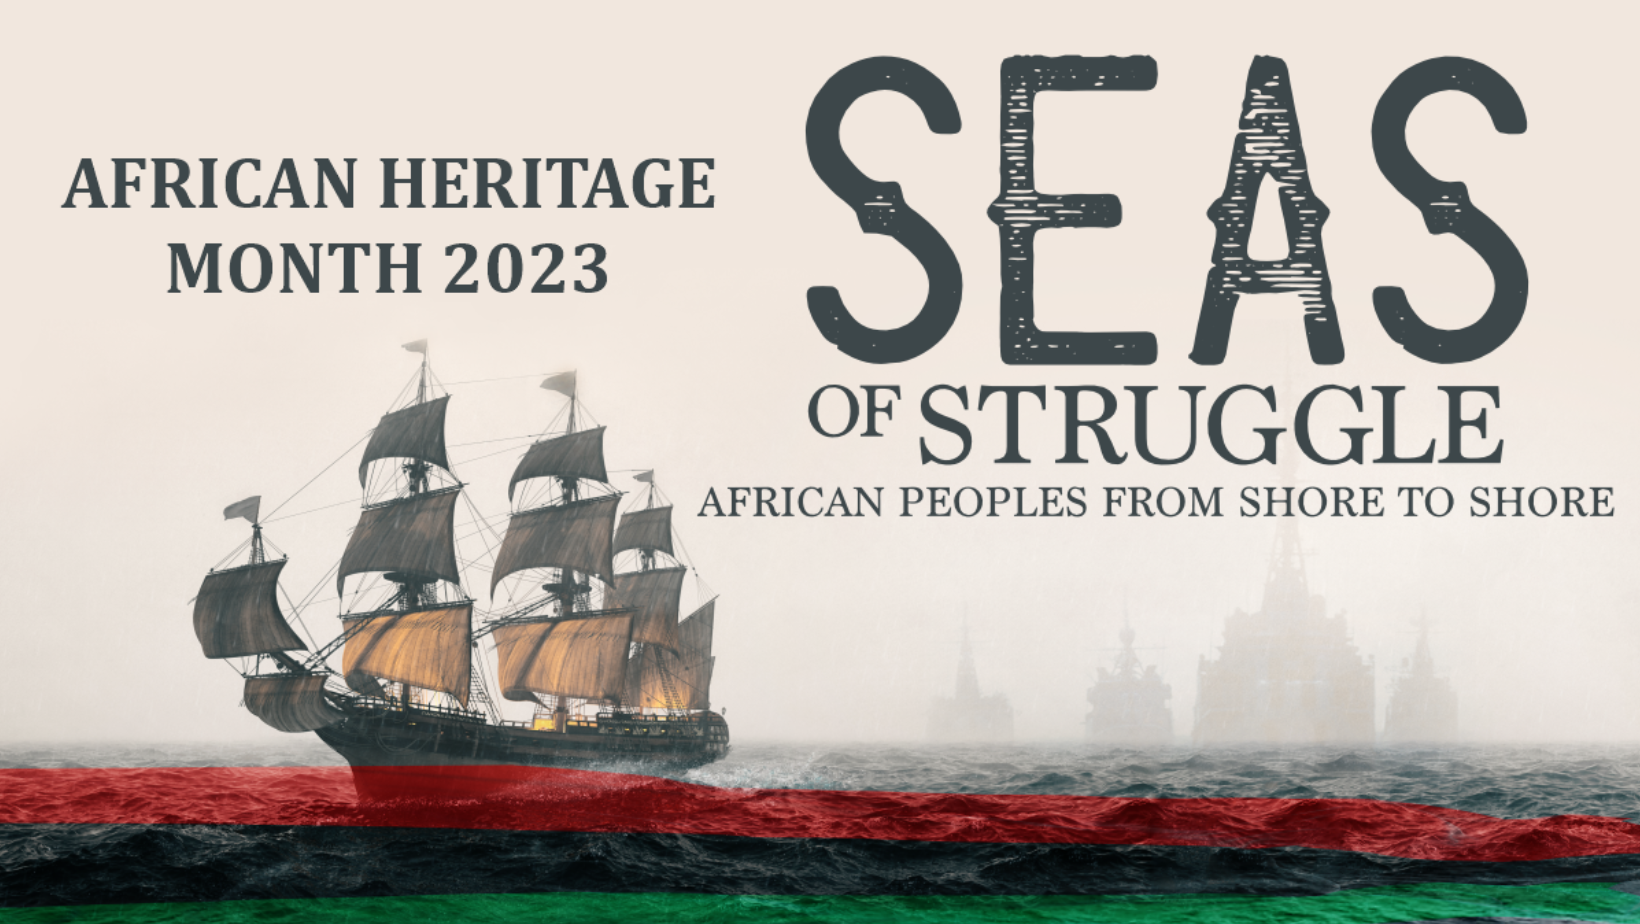 African Heritage Month theme for 2023: Seas of Struggle